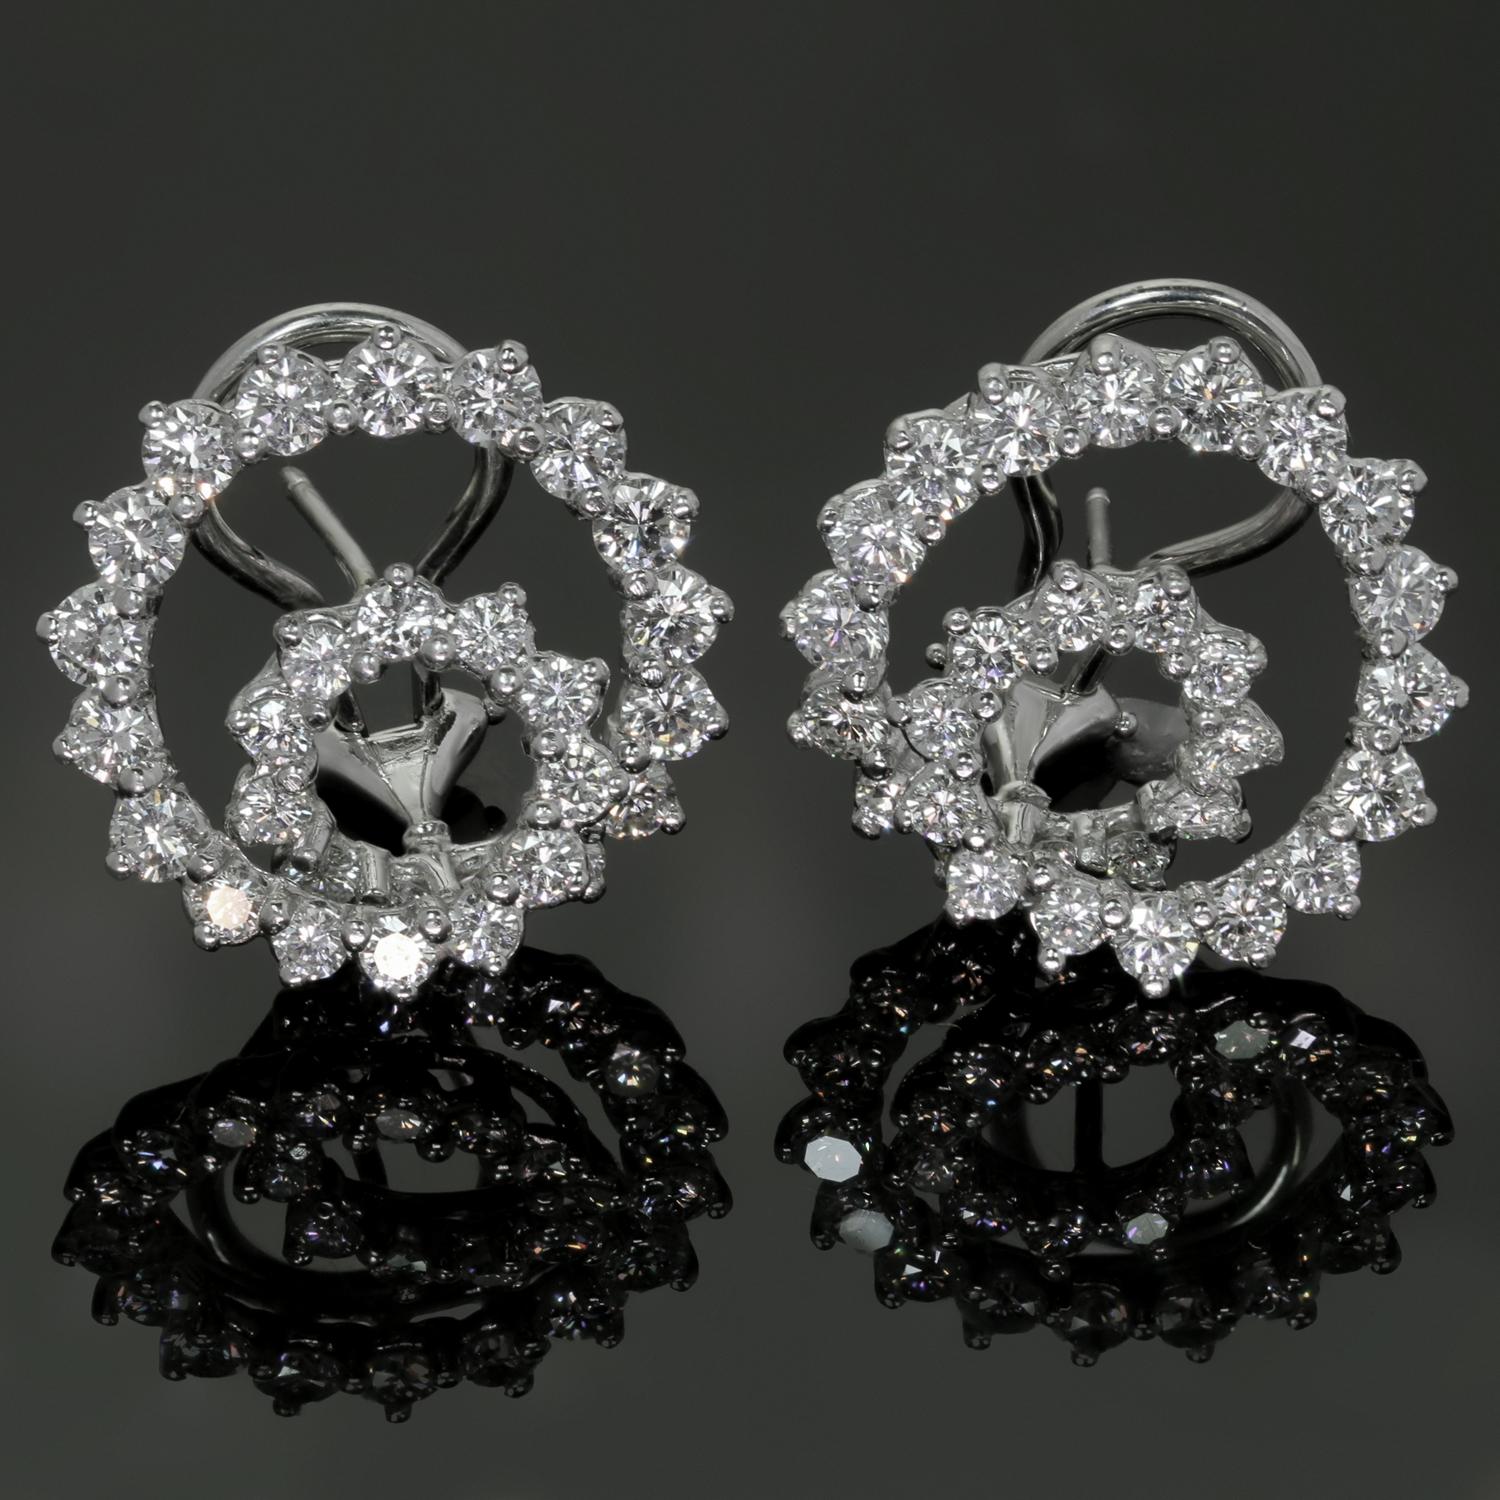 These gorgeous Angela Cummings earrings feature a swirling spiral design crafted in platinum and set with approximately 58 brilliant-cut round diamonds weighing an estimated 3.8 - 4.0 carats. These are the large model. Made in United States circa